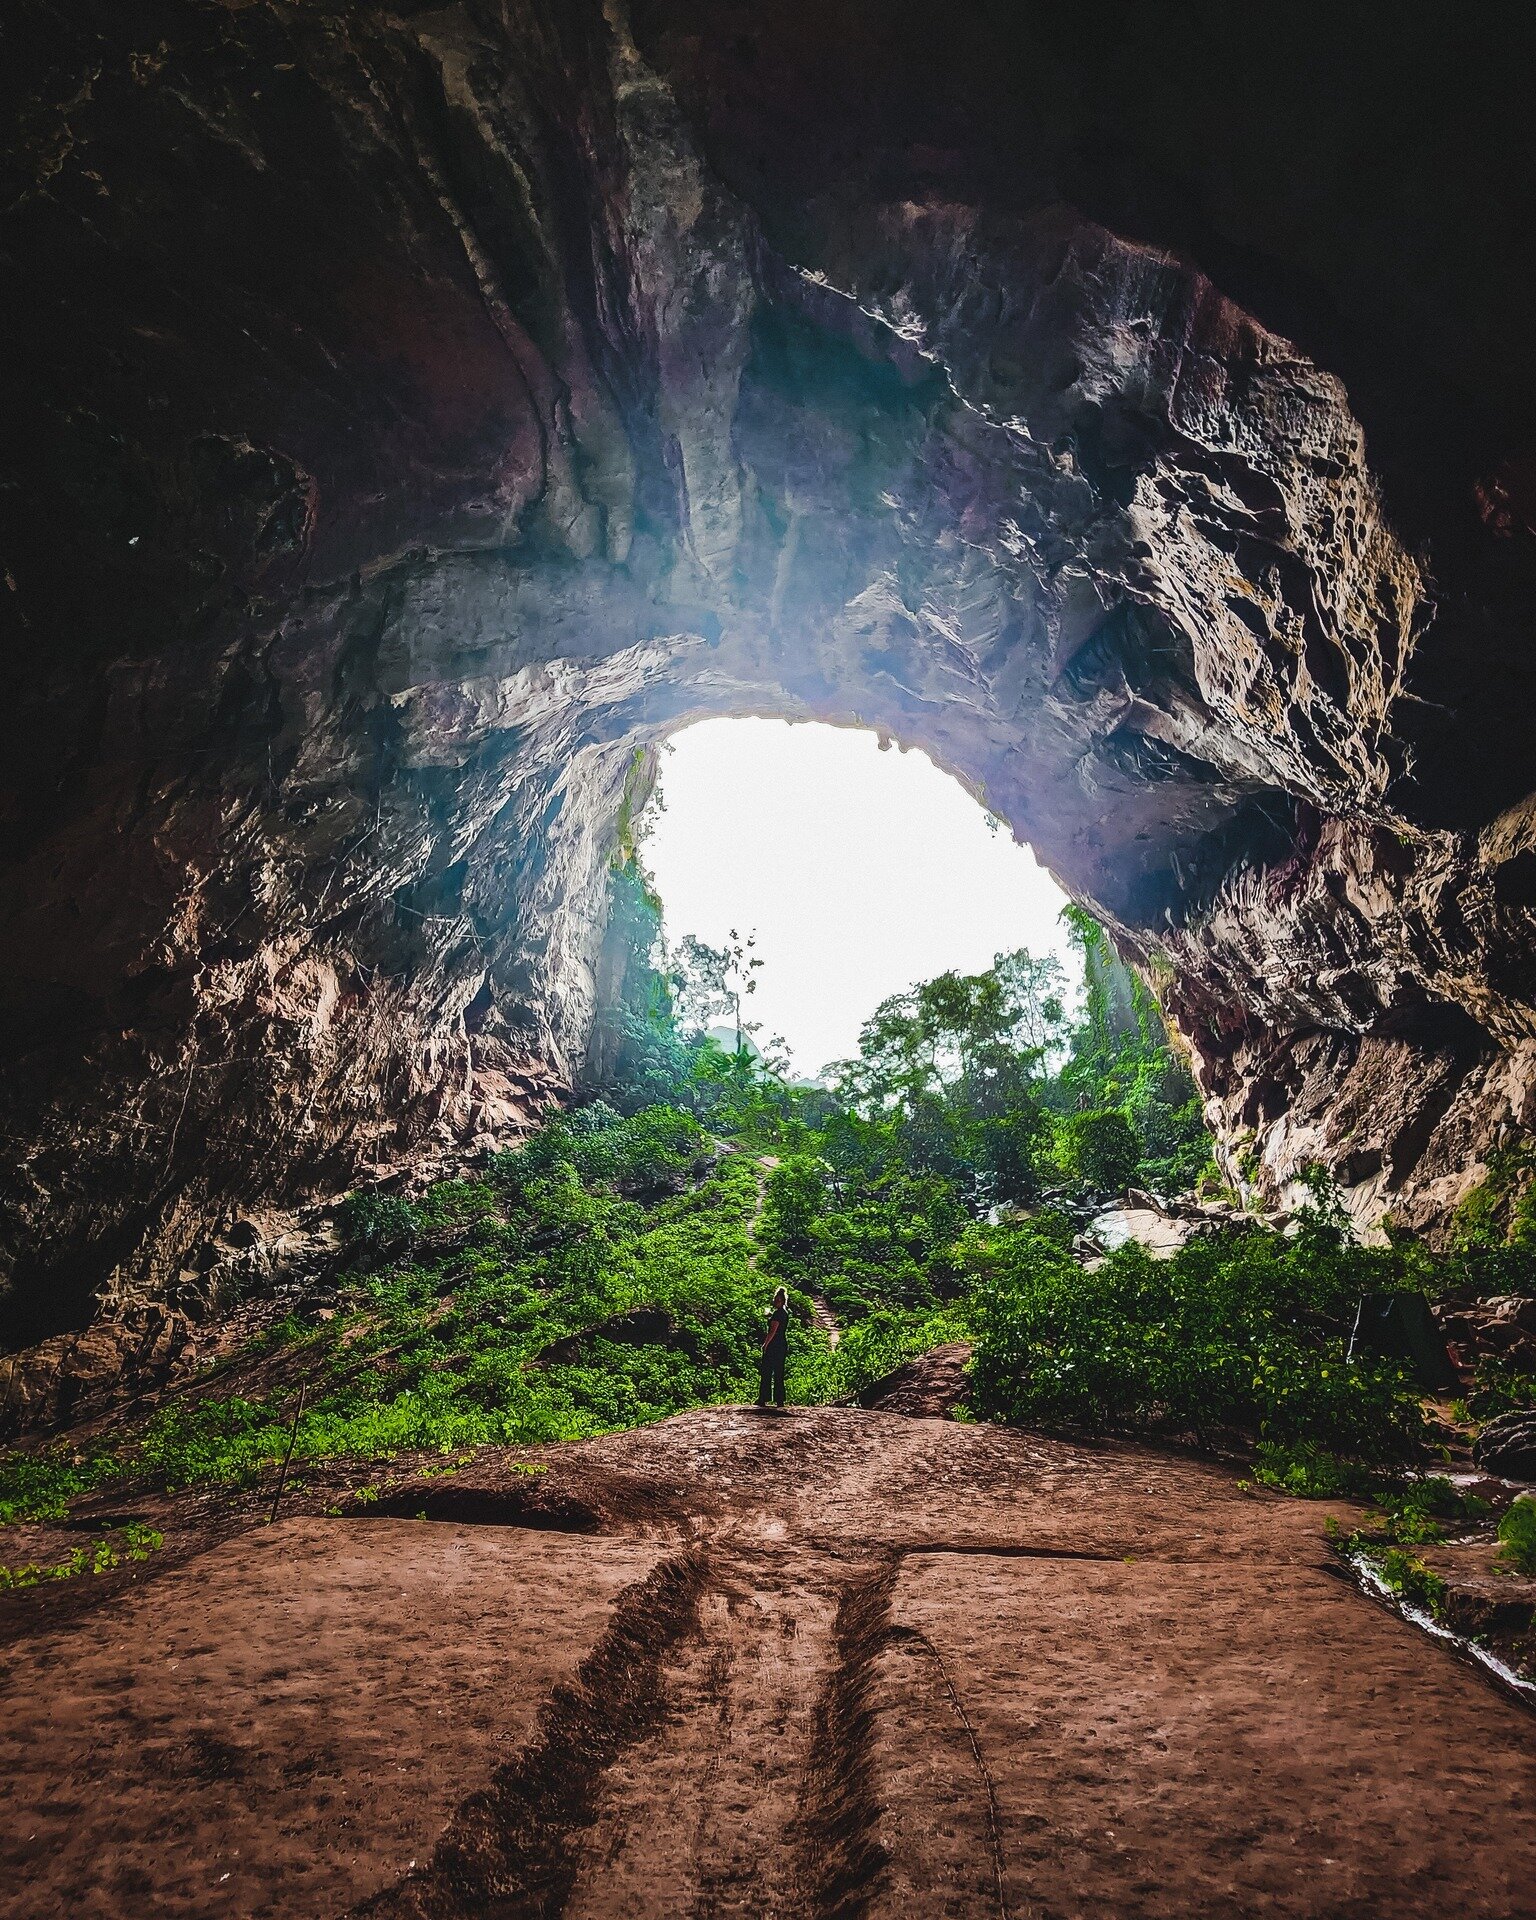 Phong Nha is home to some of the greatest adventures that Vietnam has to offer. 

A few weeks ago I was able to partake in an incredible and unique experience, one that took me deep into the world&rsquo;s 4th largest cave. 

In this 2 -day 1 -night j